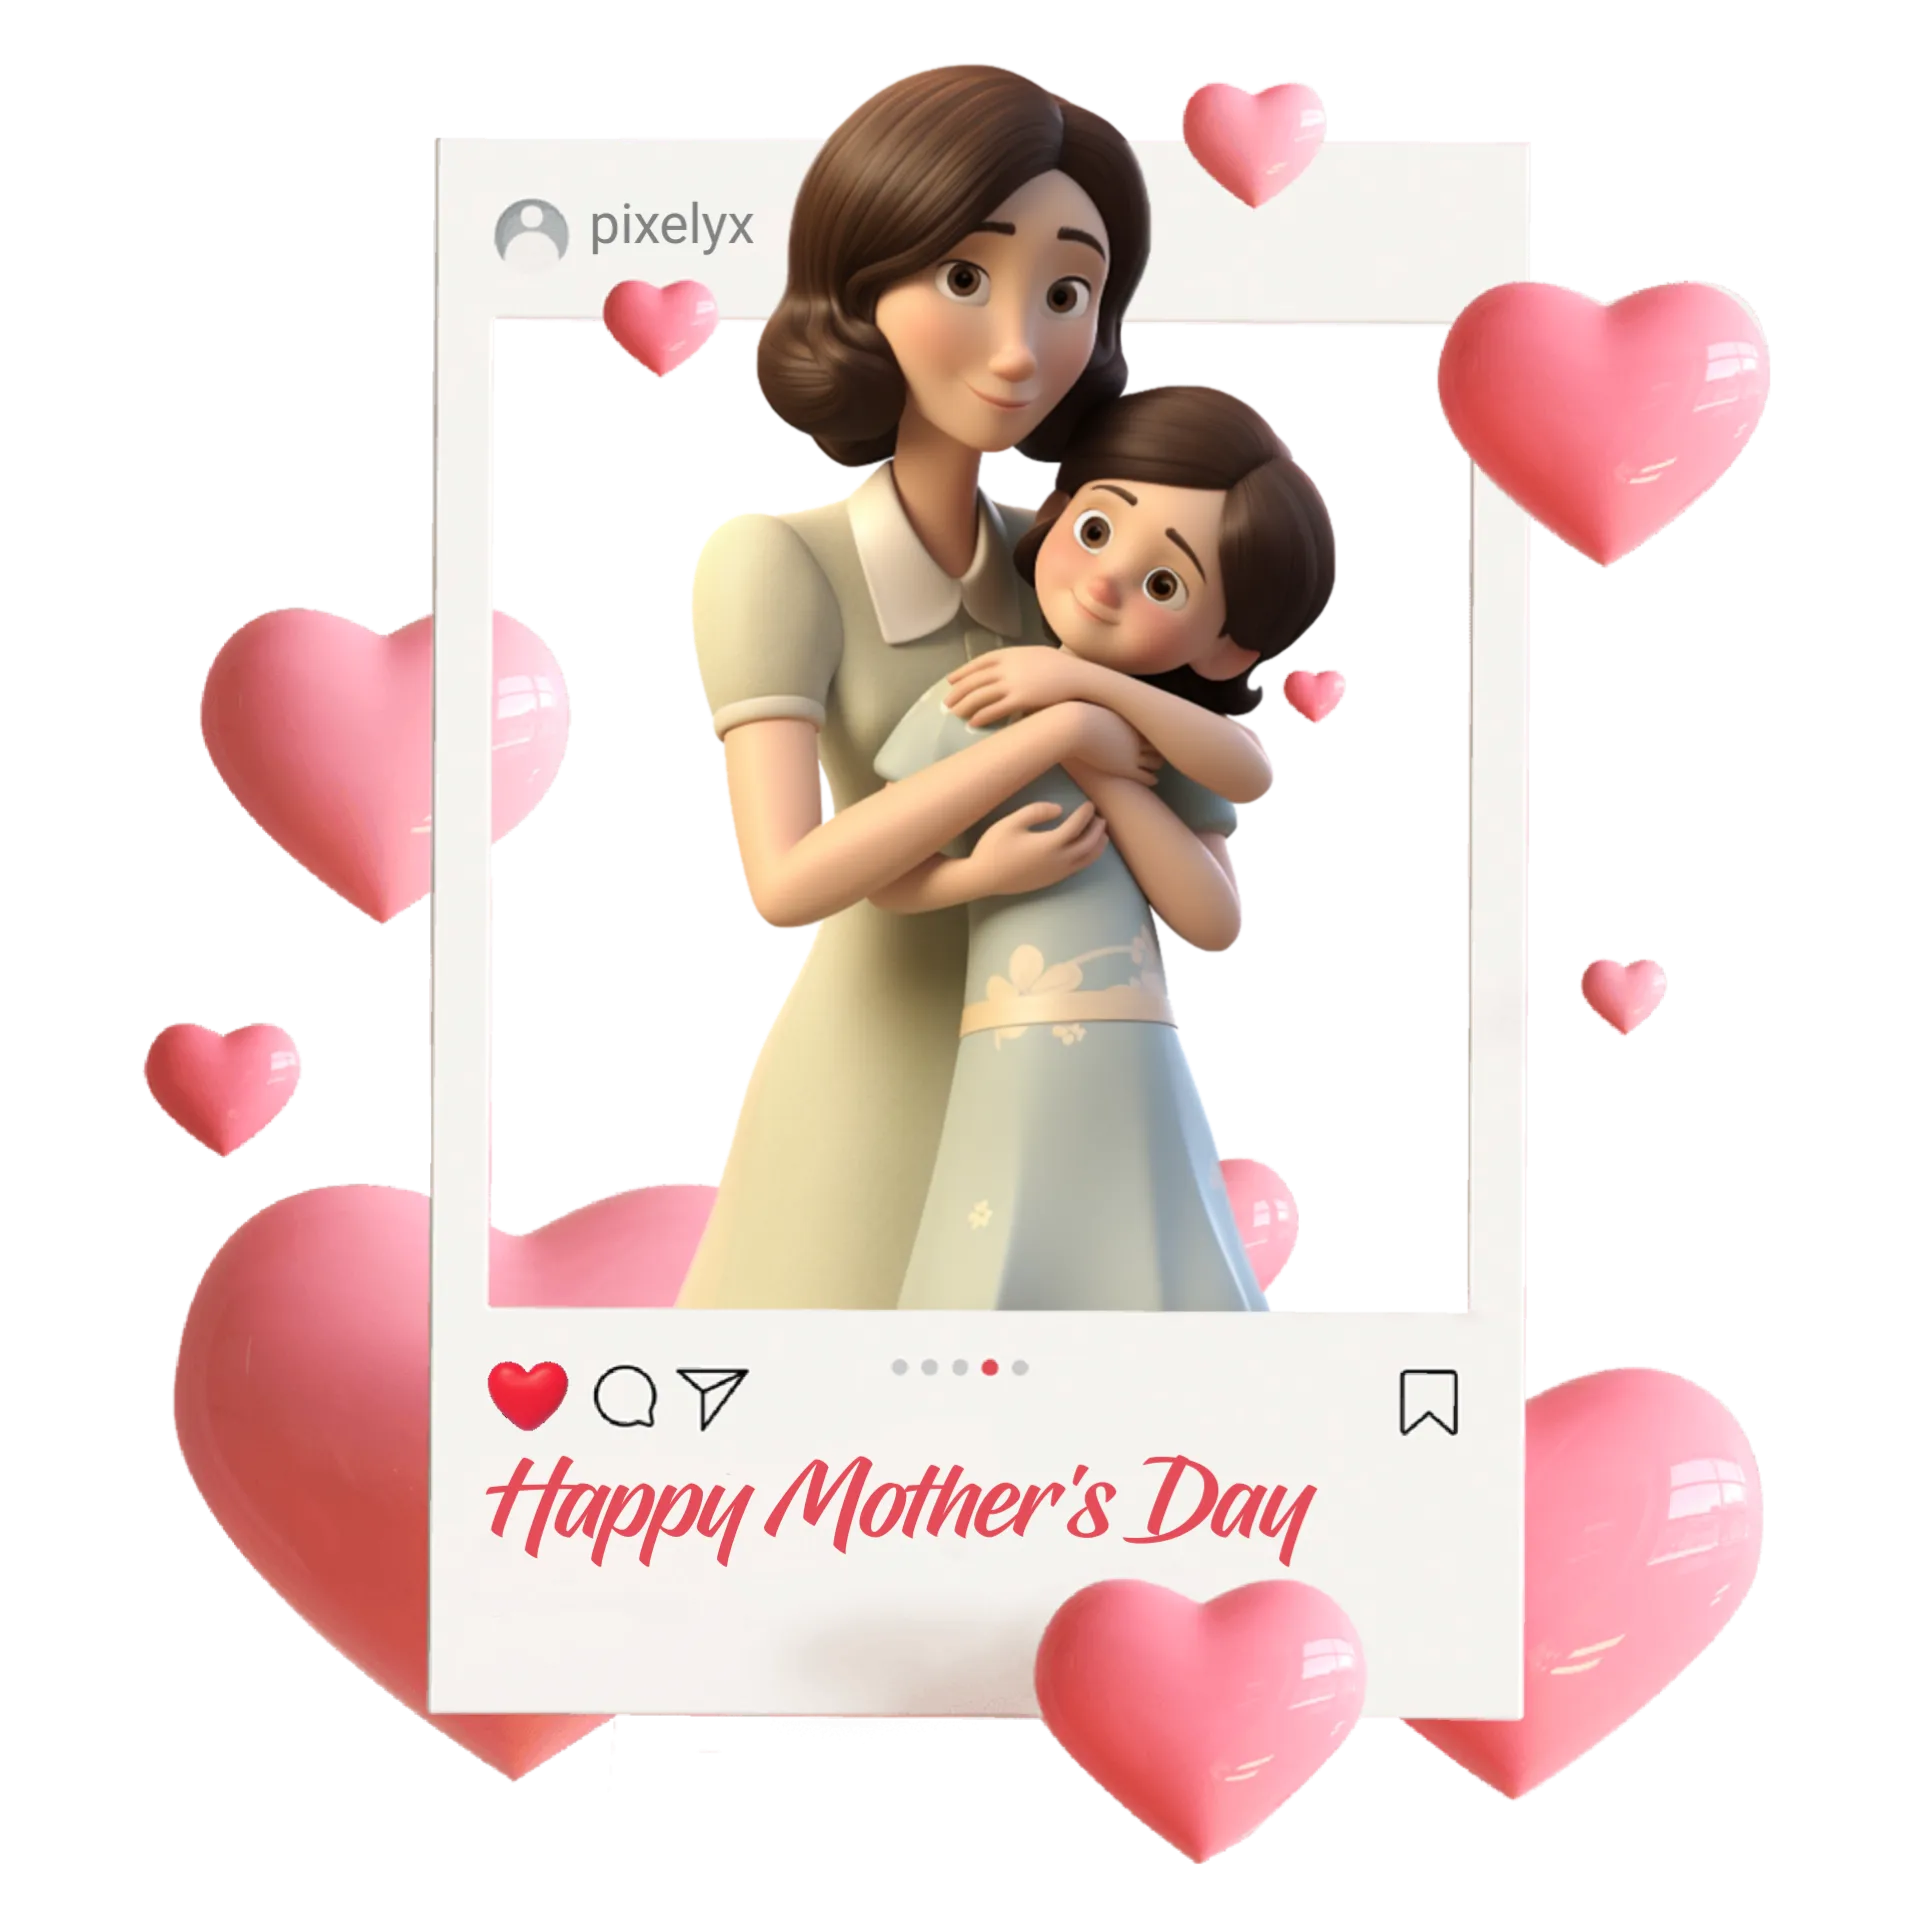 Happy Mother's Day Wishes PNG Free Download